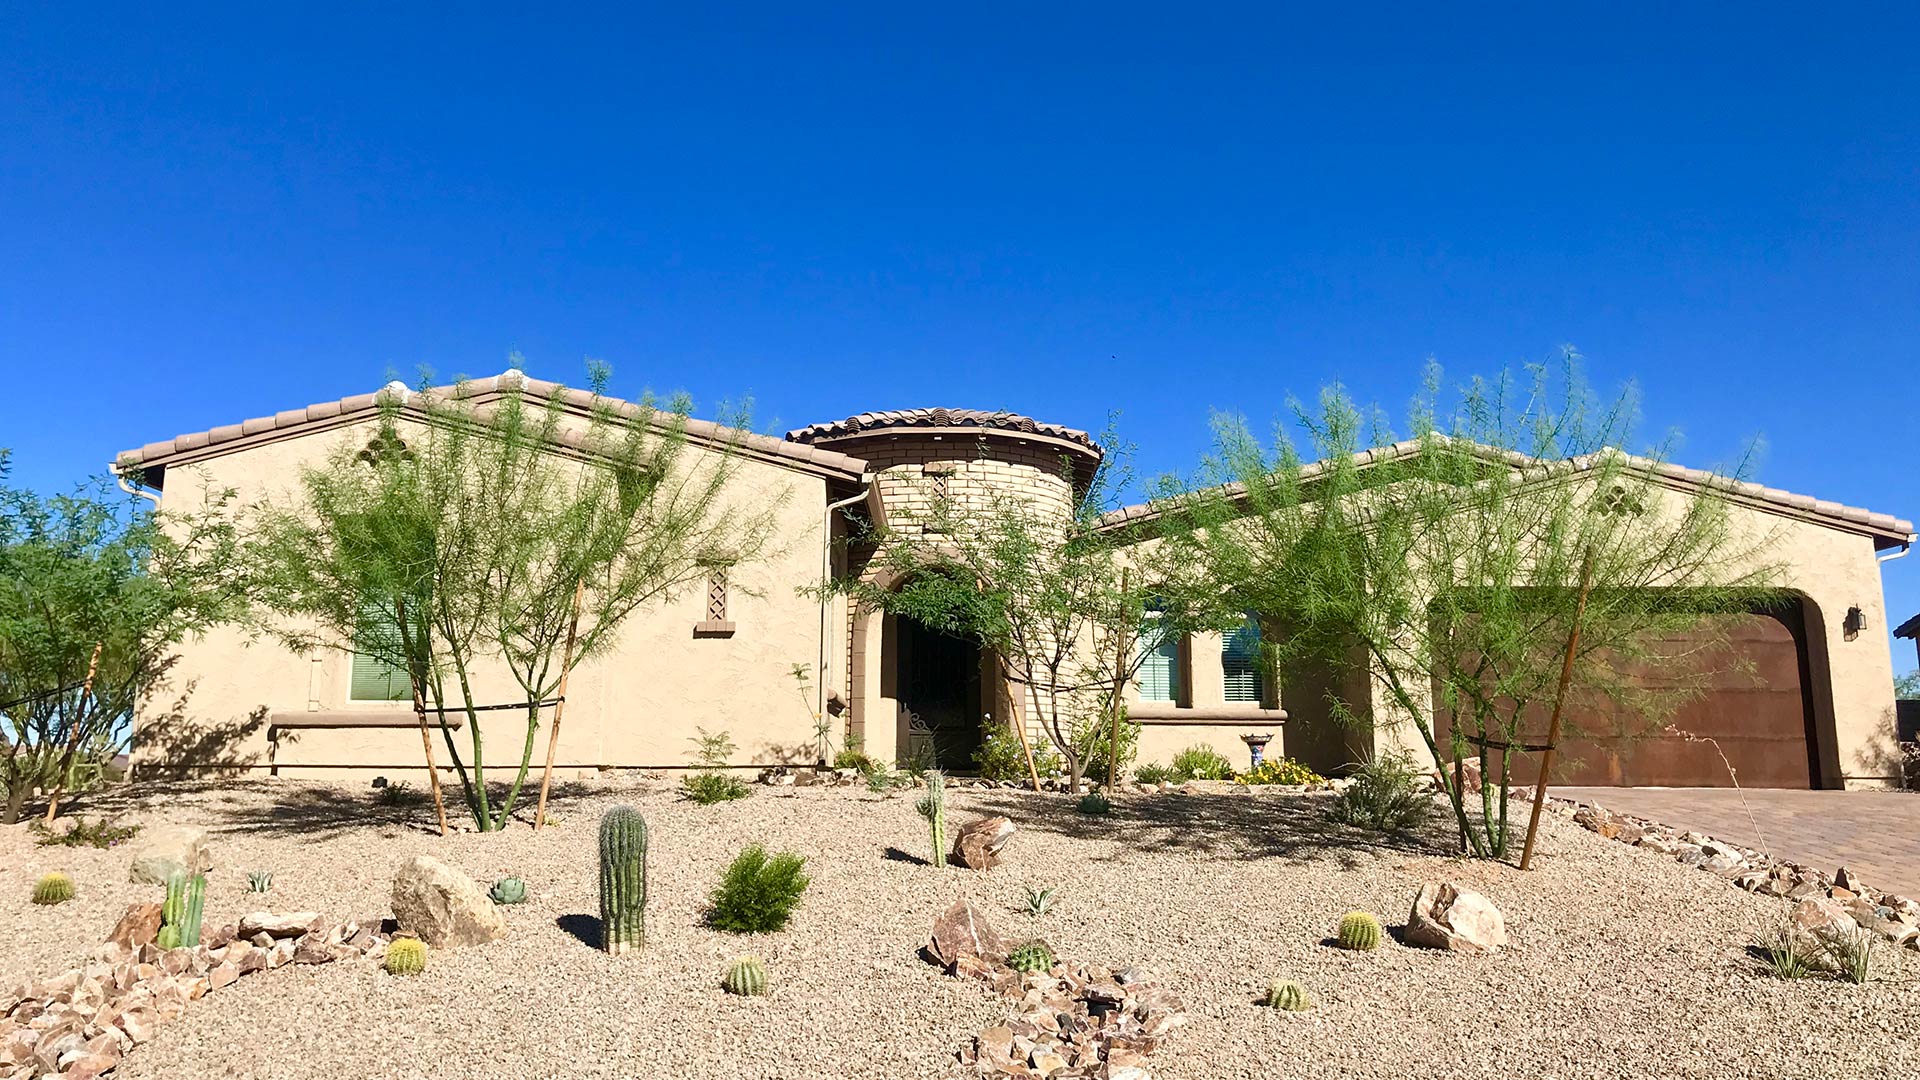 Since the 1980s Tucsonans have replaced their green lawns with decomposed granite and opted for plants like palo verde trees and cacti, which can endure long periods of drought and extreme heat.